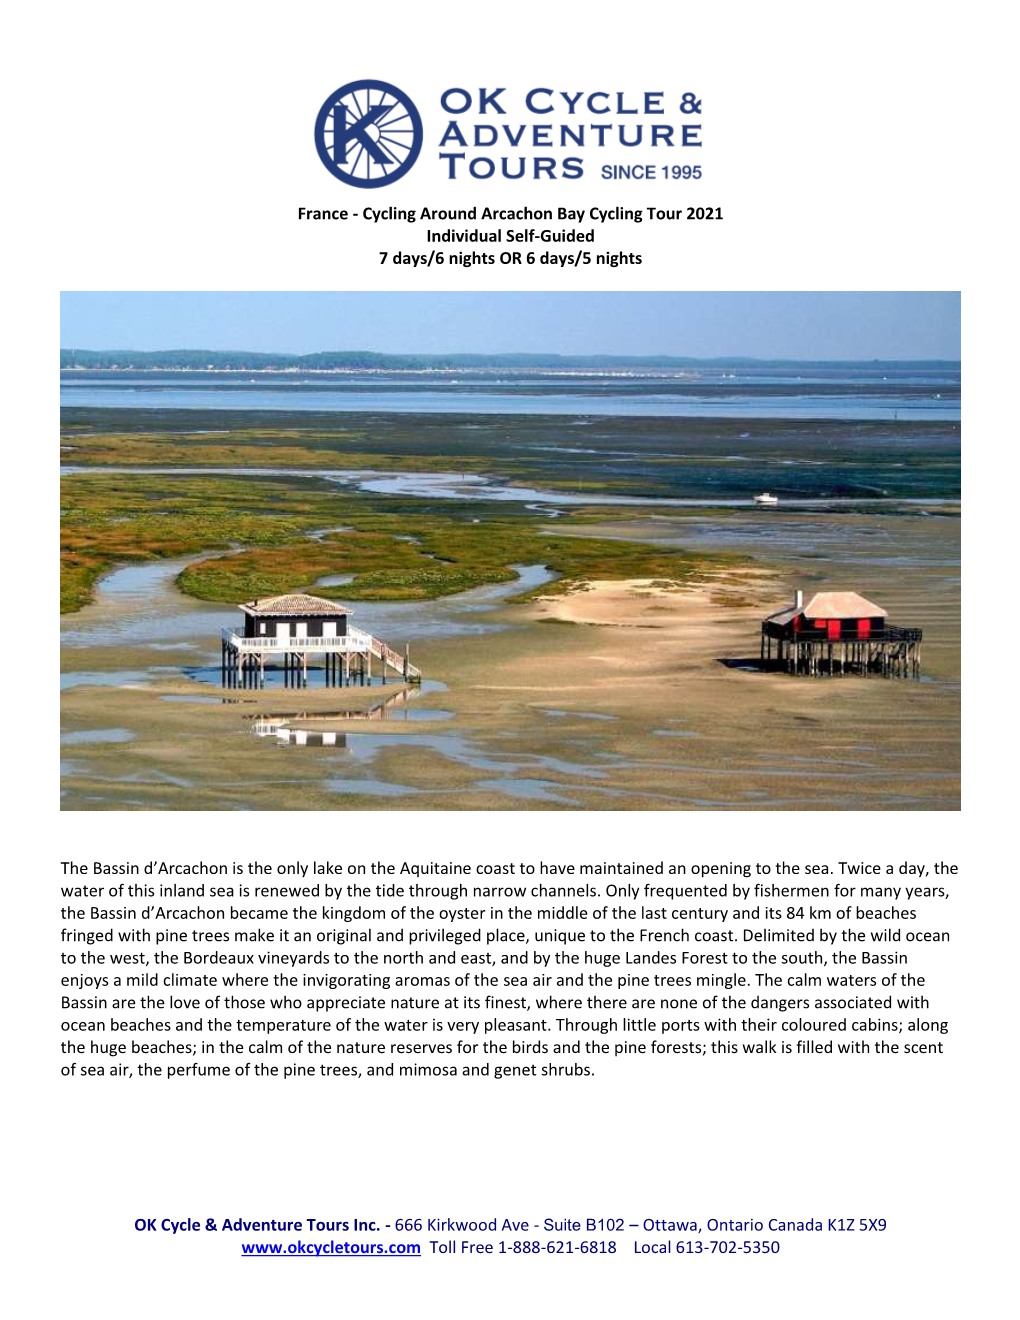 France - Cycling Around Arcachon Bay Cycling Tour 2021 Individual Self-Guided 7 Days/6 Nights OR 6 Days/5 Nights